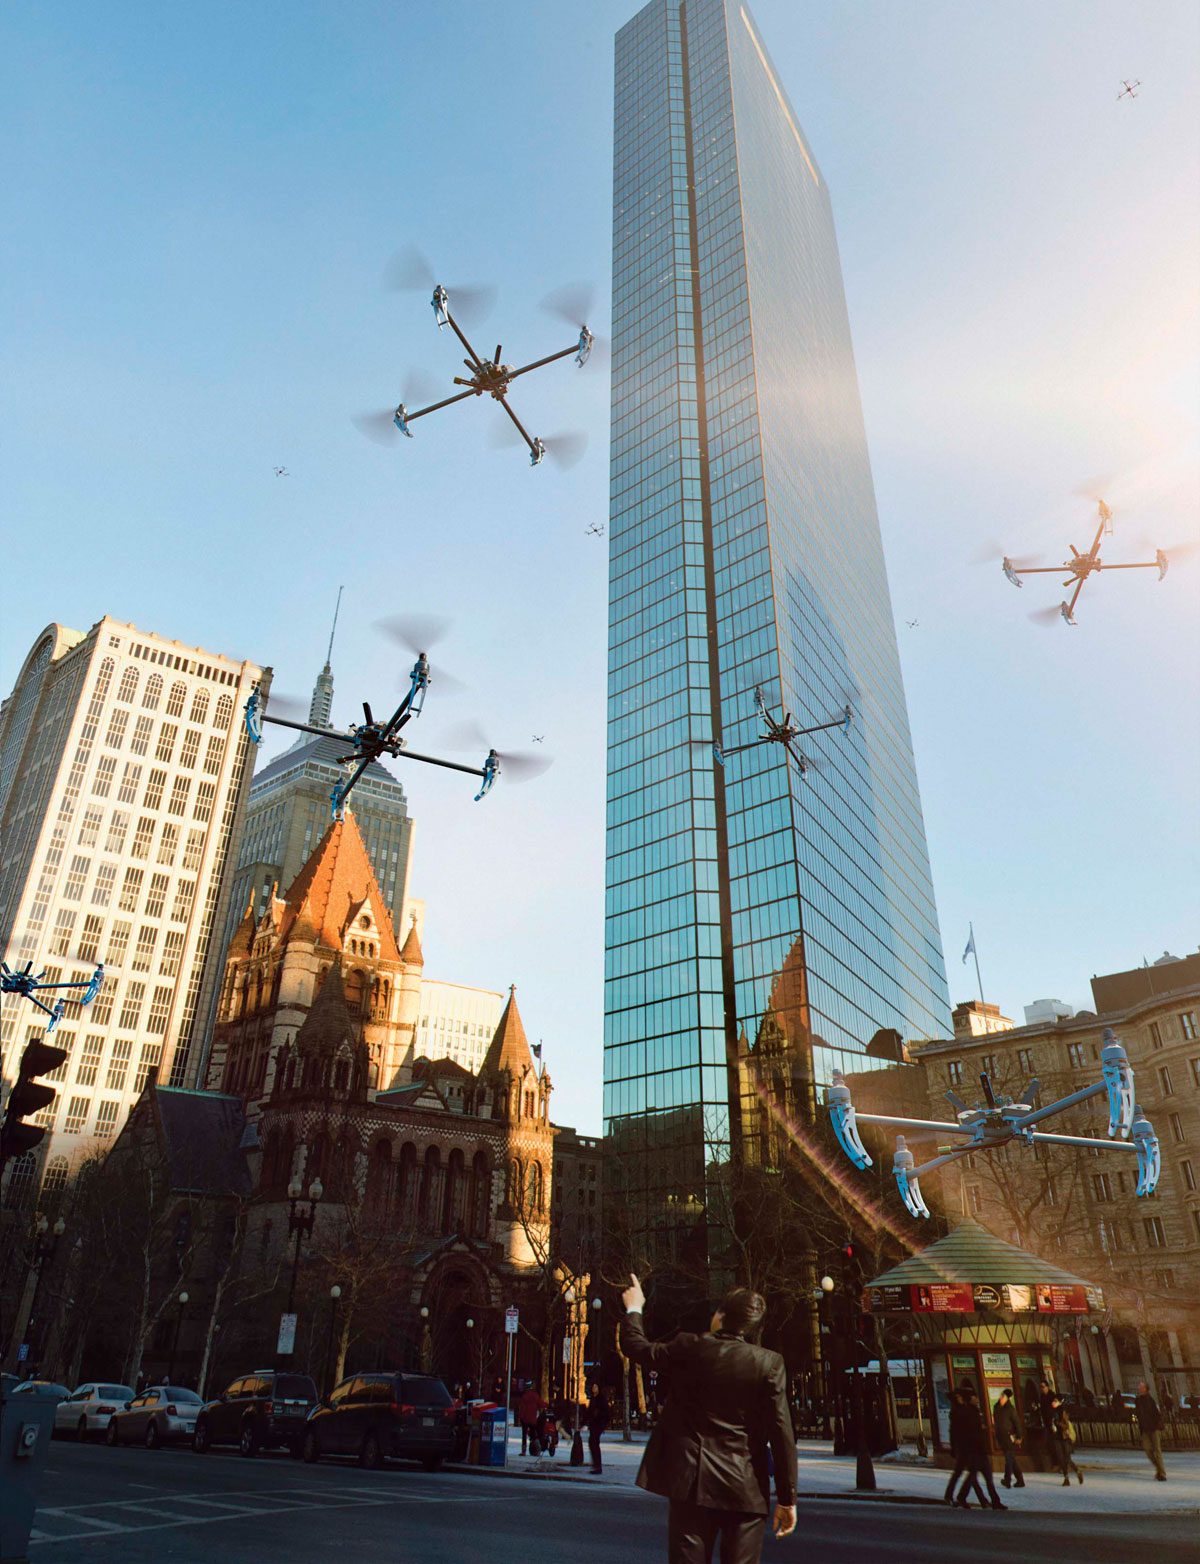 State Police in MA to Launch Drone Education Program